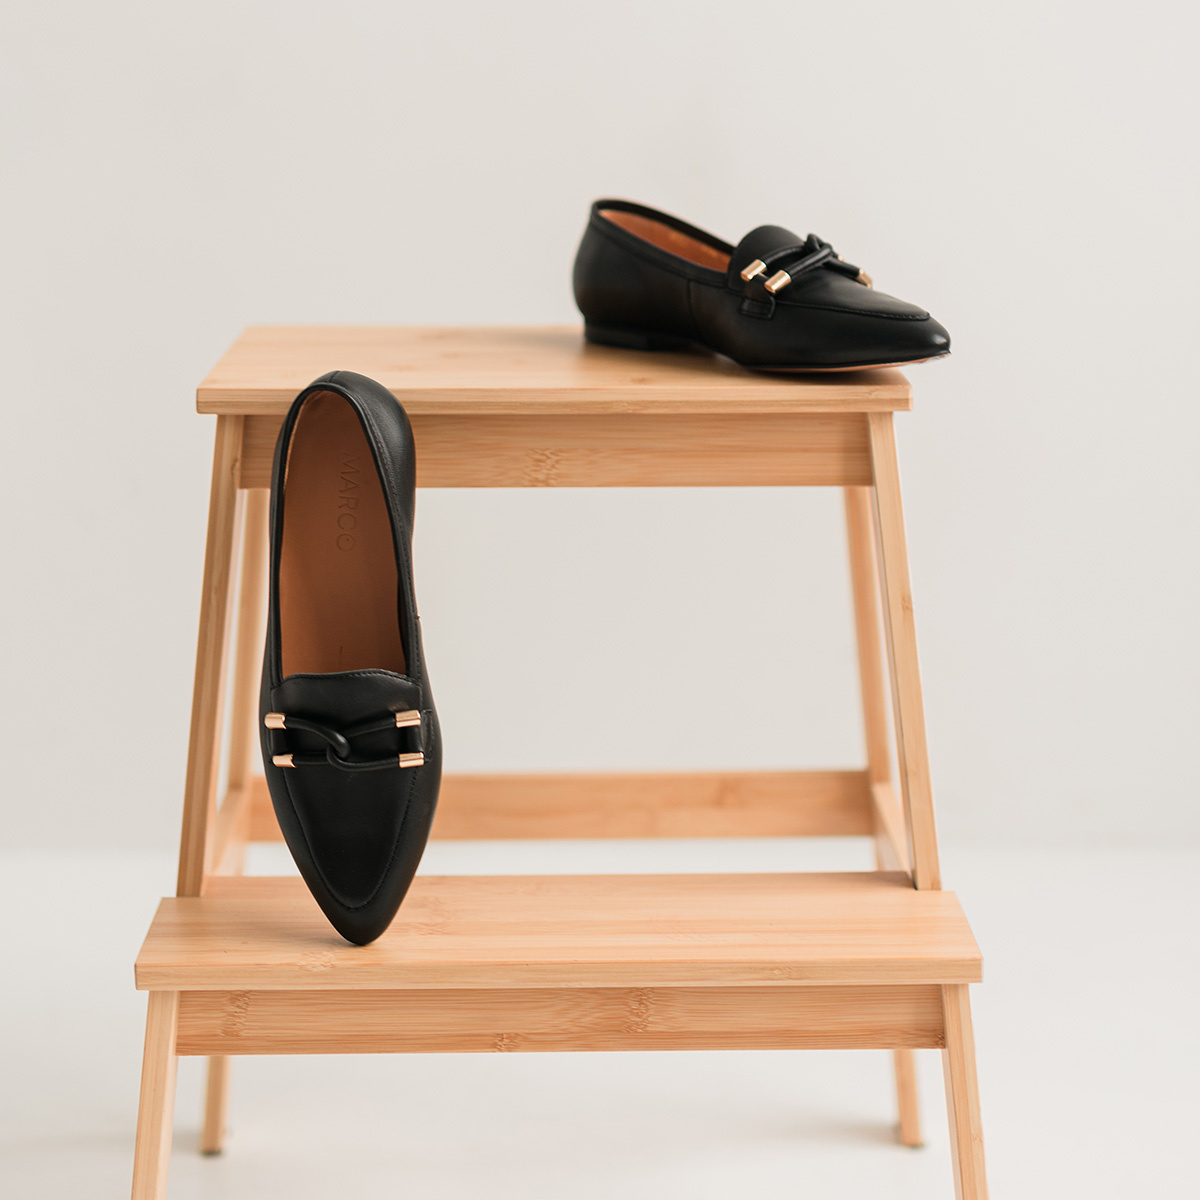 Loafers Chaine